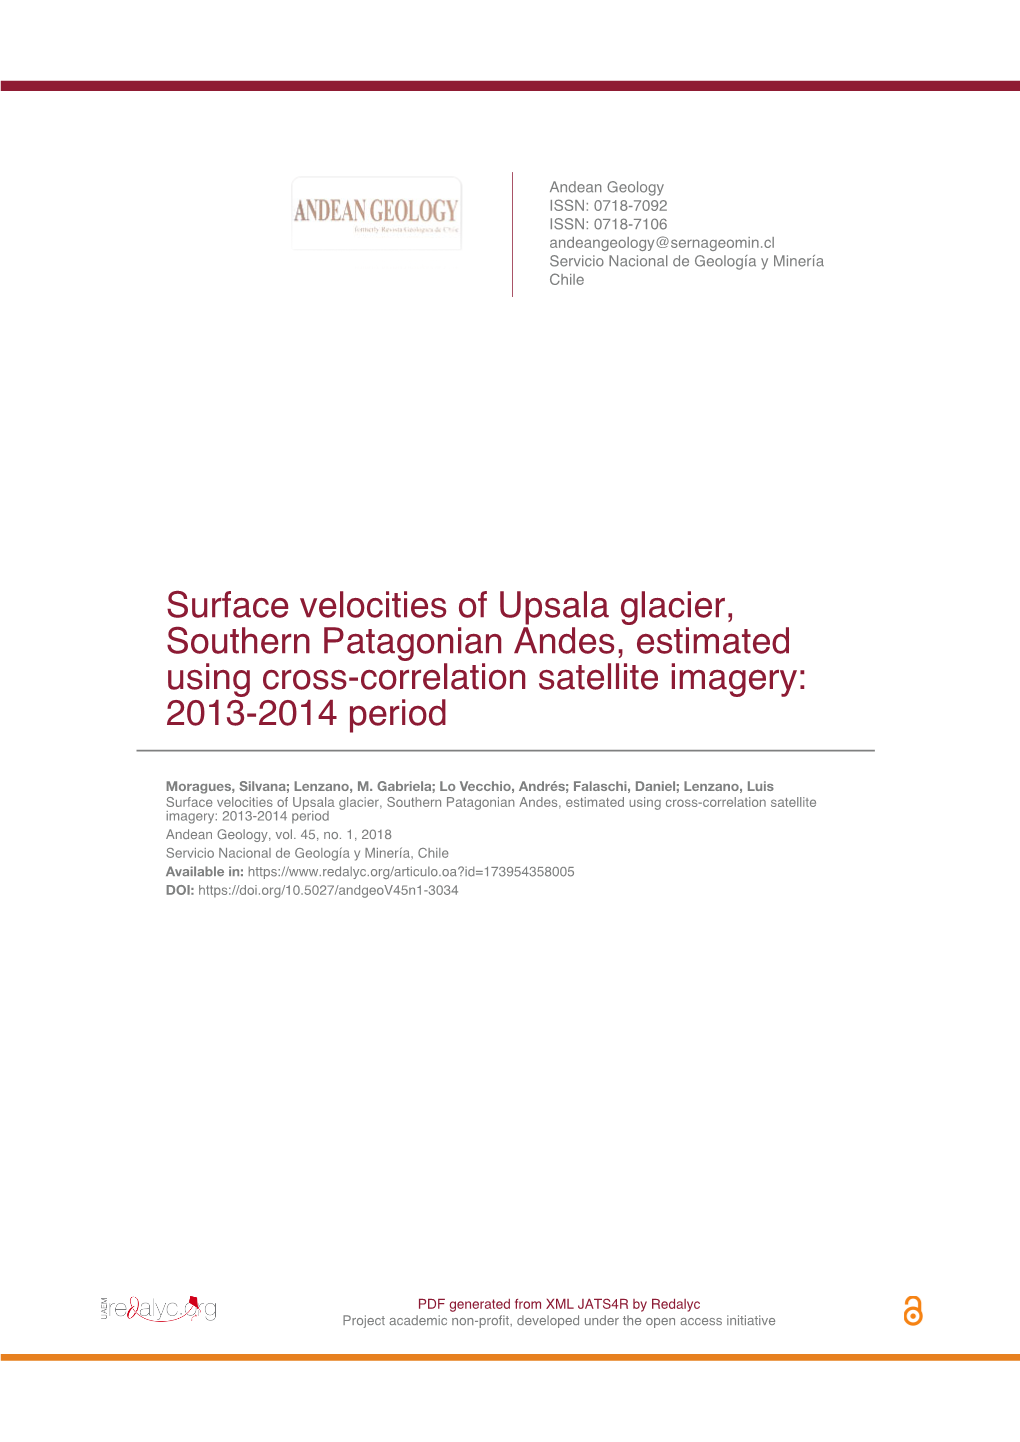 Surface Velocities of Upsala Glacier, Southern Patagonian Andes, Estimated Using Cross-Correlation Satellite Imagery: 2013-2014 Period